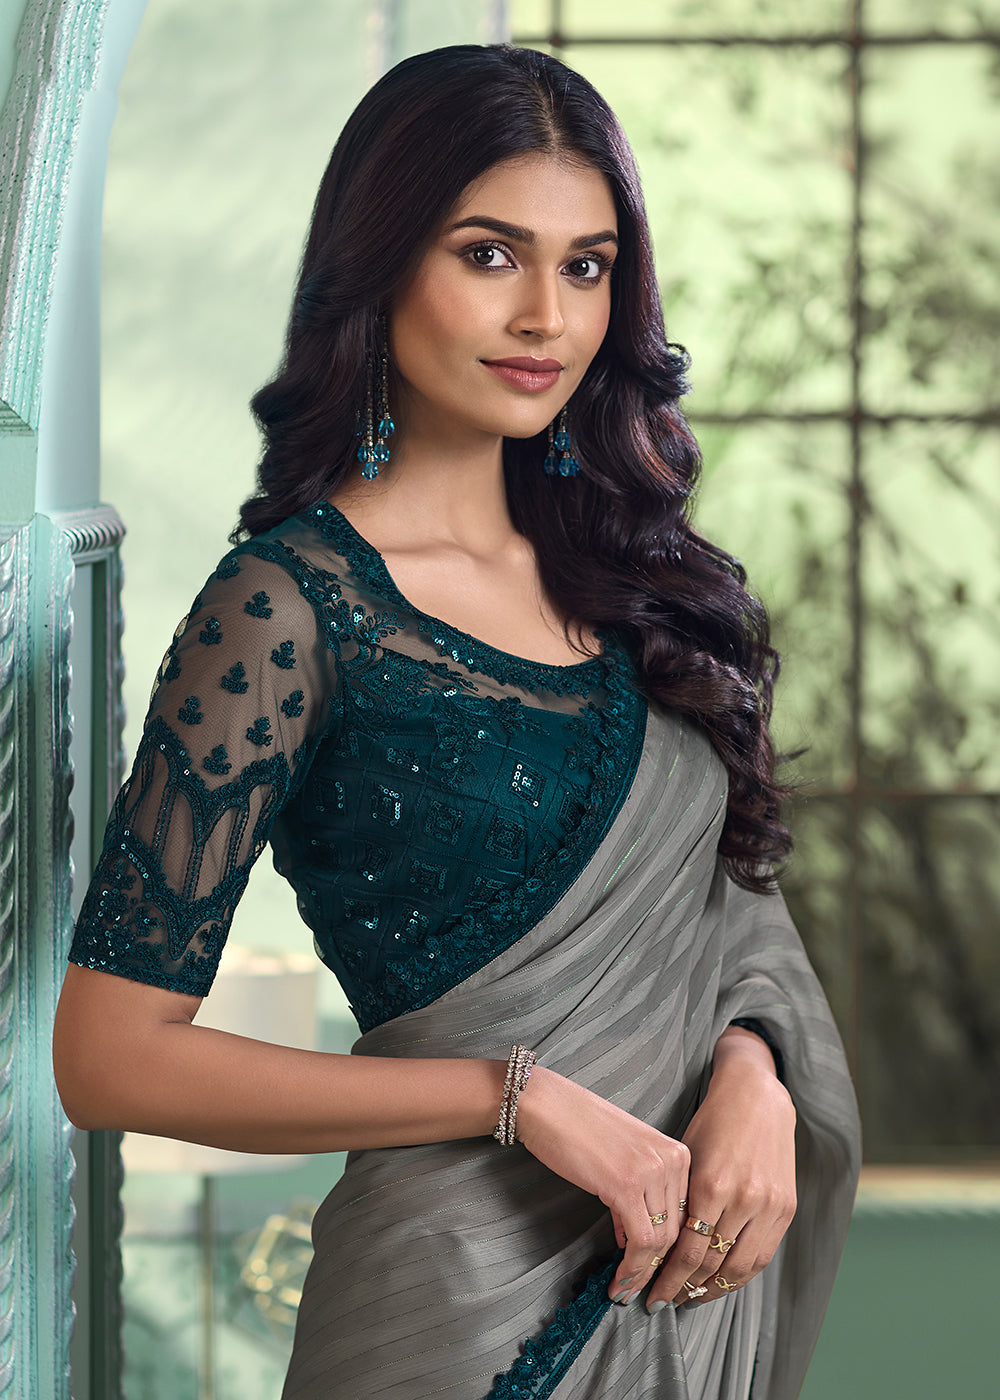 Buy Now Lovely Grey Georgette Silk Embroidered Wedding Party Wear Saree Online in USA, UK, Canada & Worldwide at Empress Clothing.